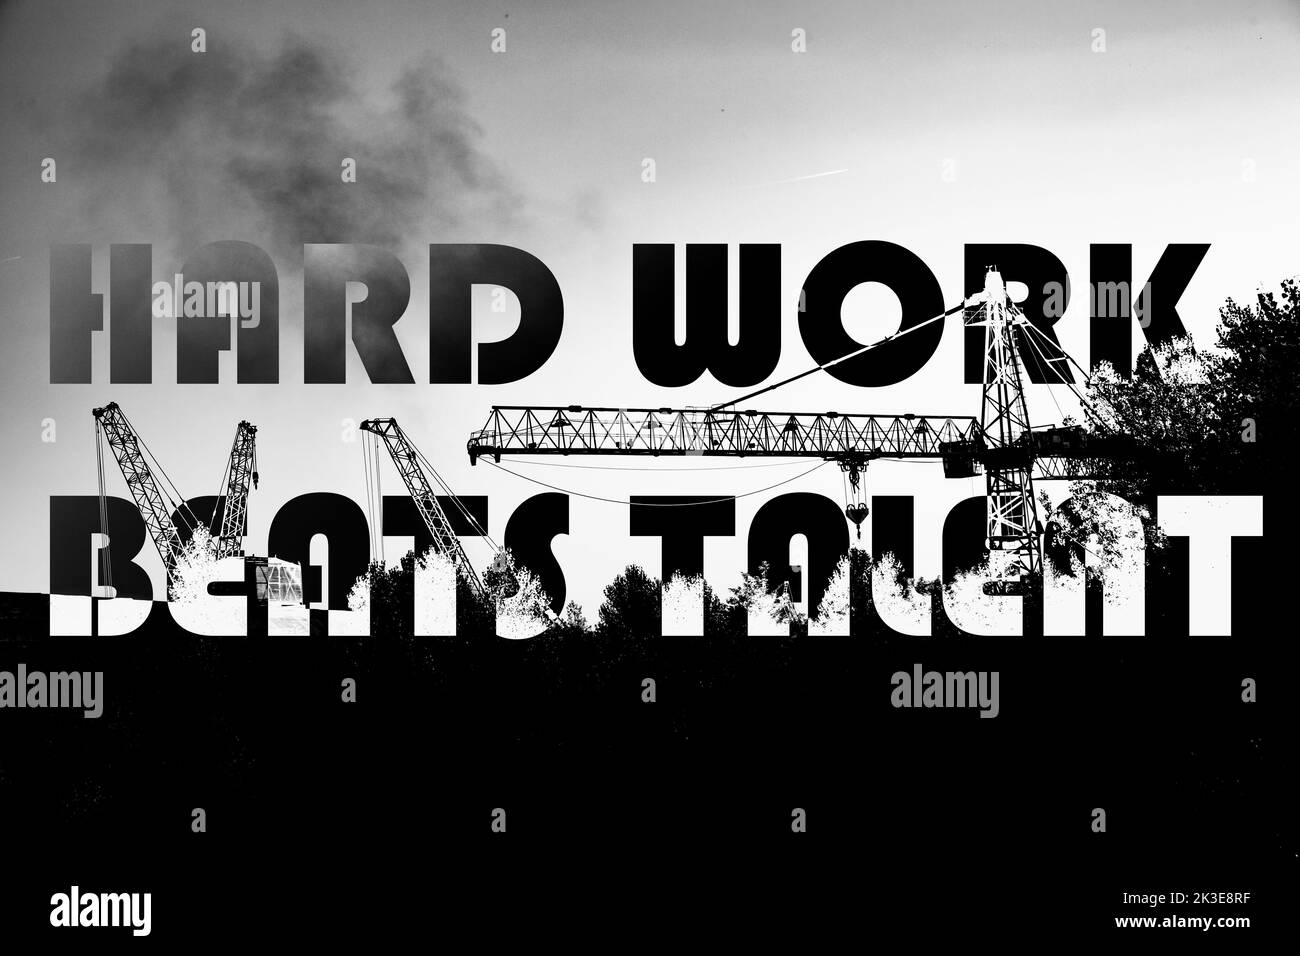 Hard work Black and White Stock Photos & Images - Alamy